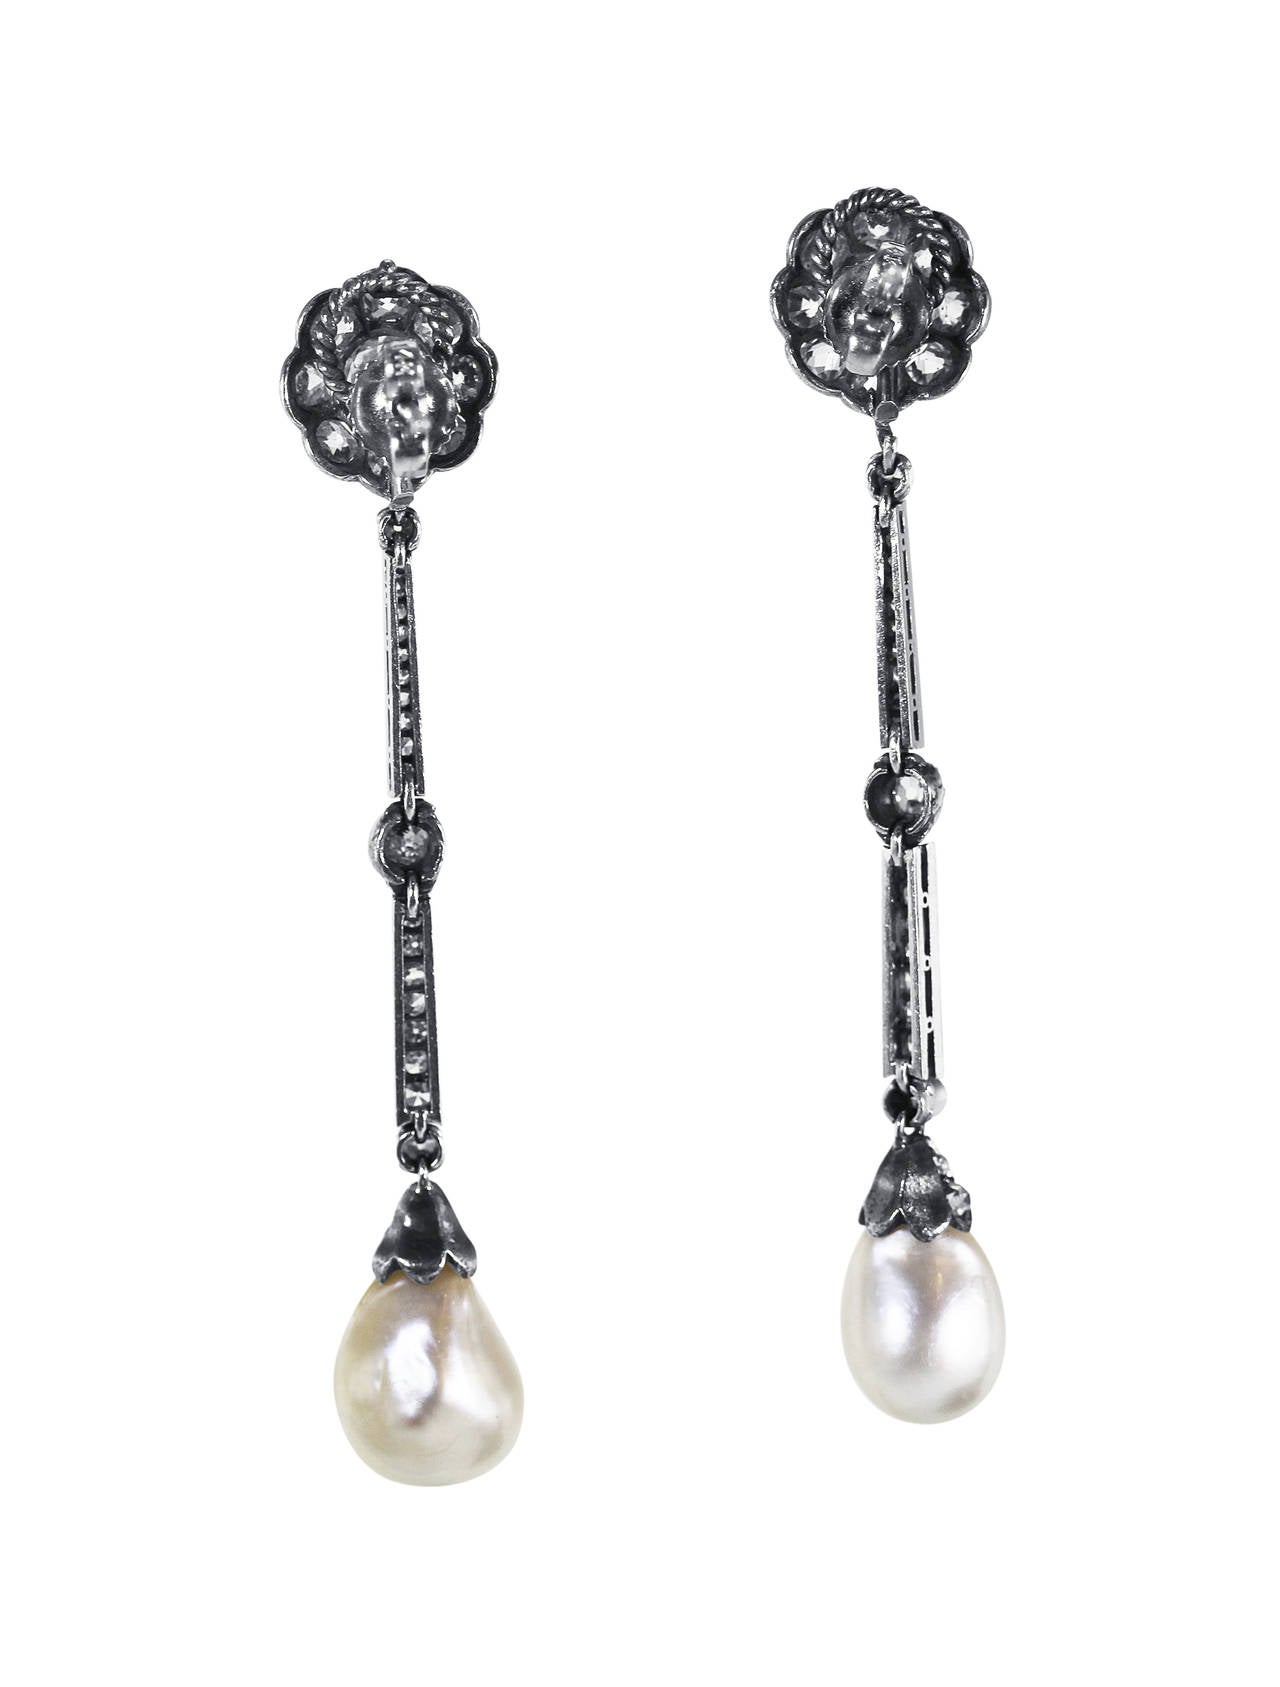 A pair of silver, platinum, natural pearl and diamond pendant-earrings, the pendants set with 2 semi-baroque natural pearl drops measuring 10.01 by 8.90 mm. and 9.23 by 8.58 mm., supported by articulated graduated pendants set throughout with 2 old